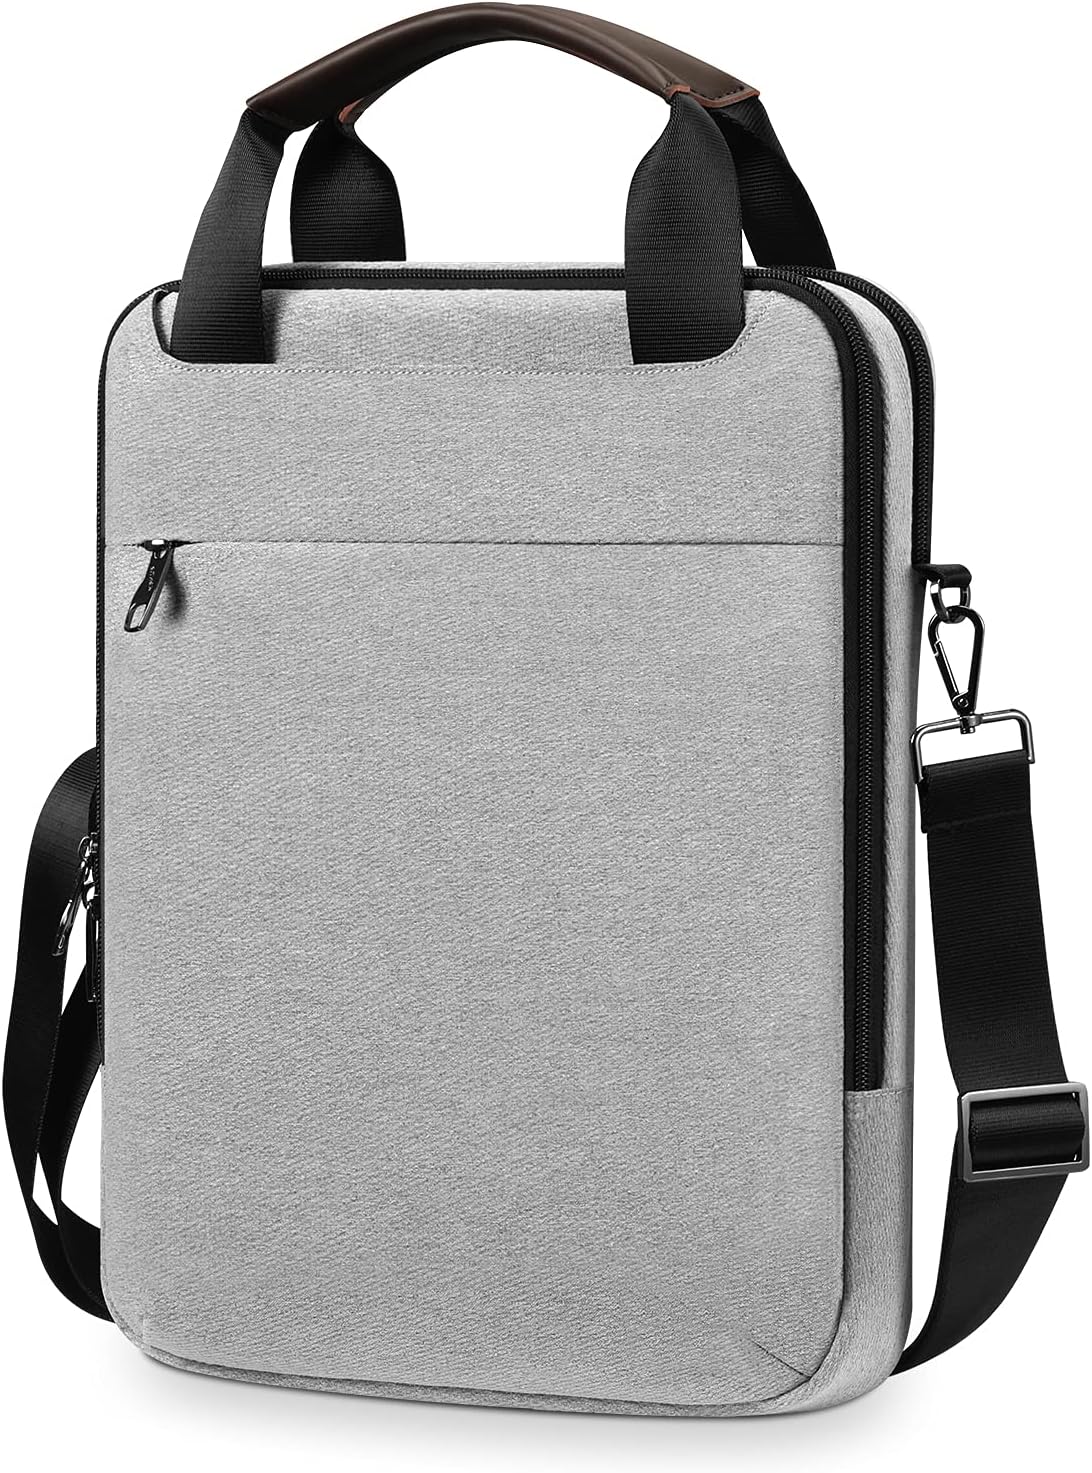 I like this bag. It is light, convenient for daily use. It also has lots of space to put every thing.Ii is highly recommended.